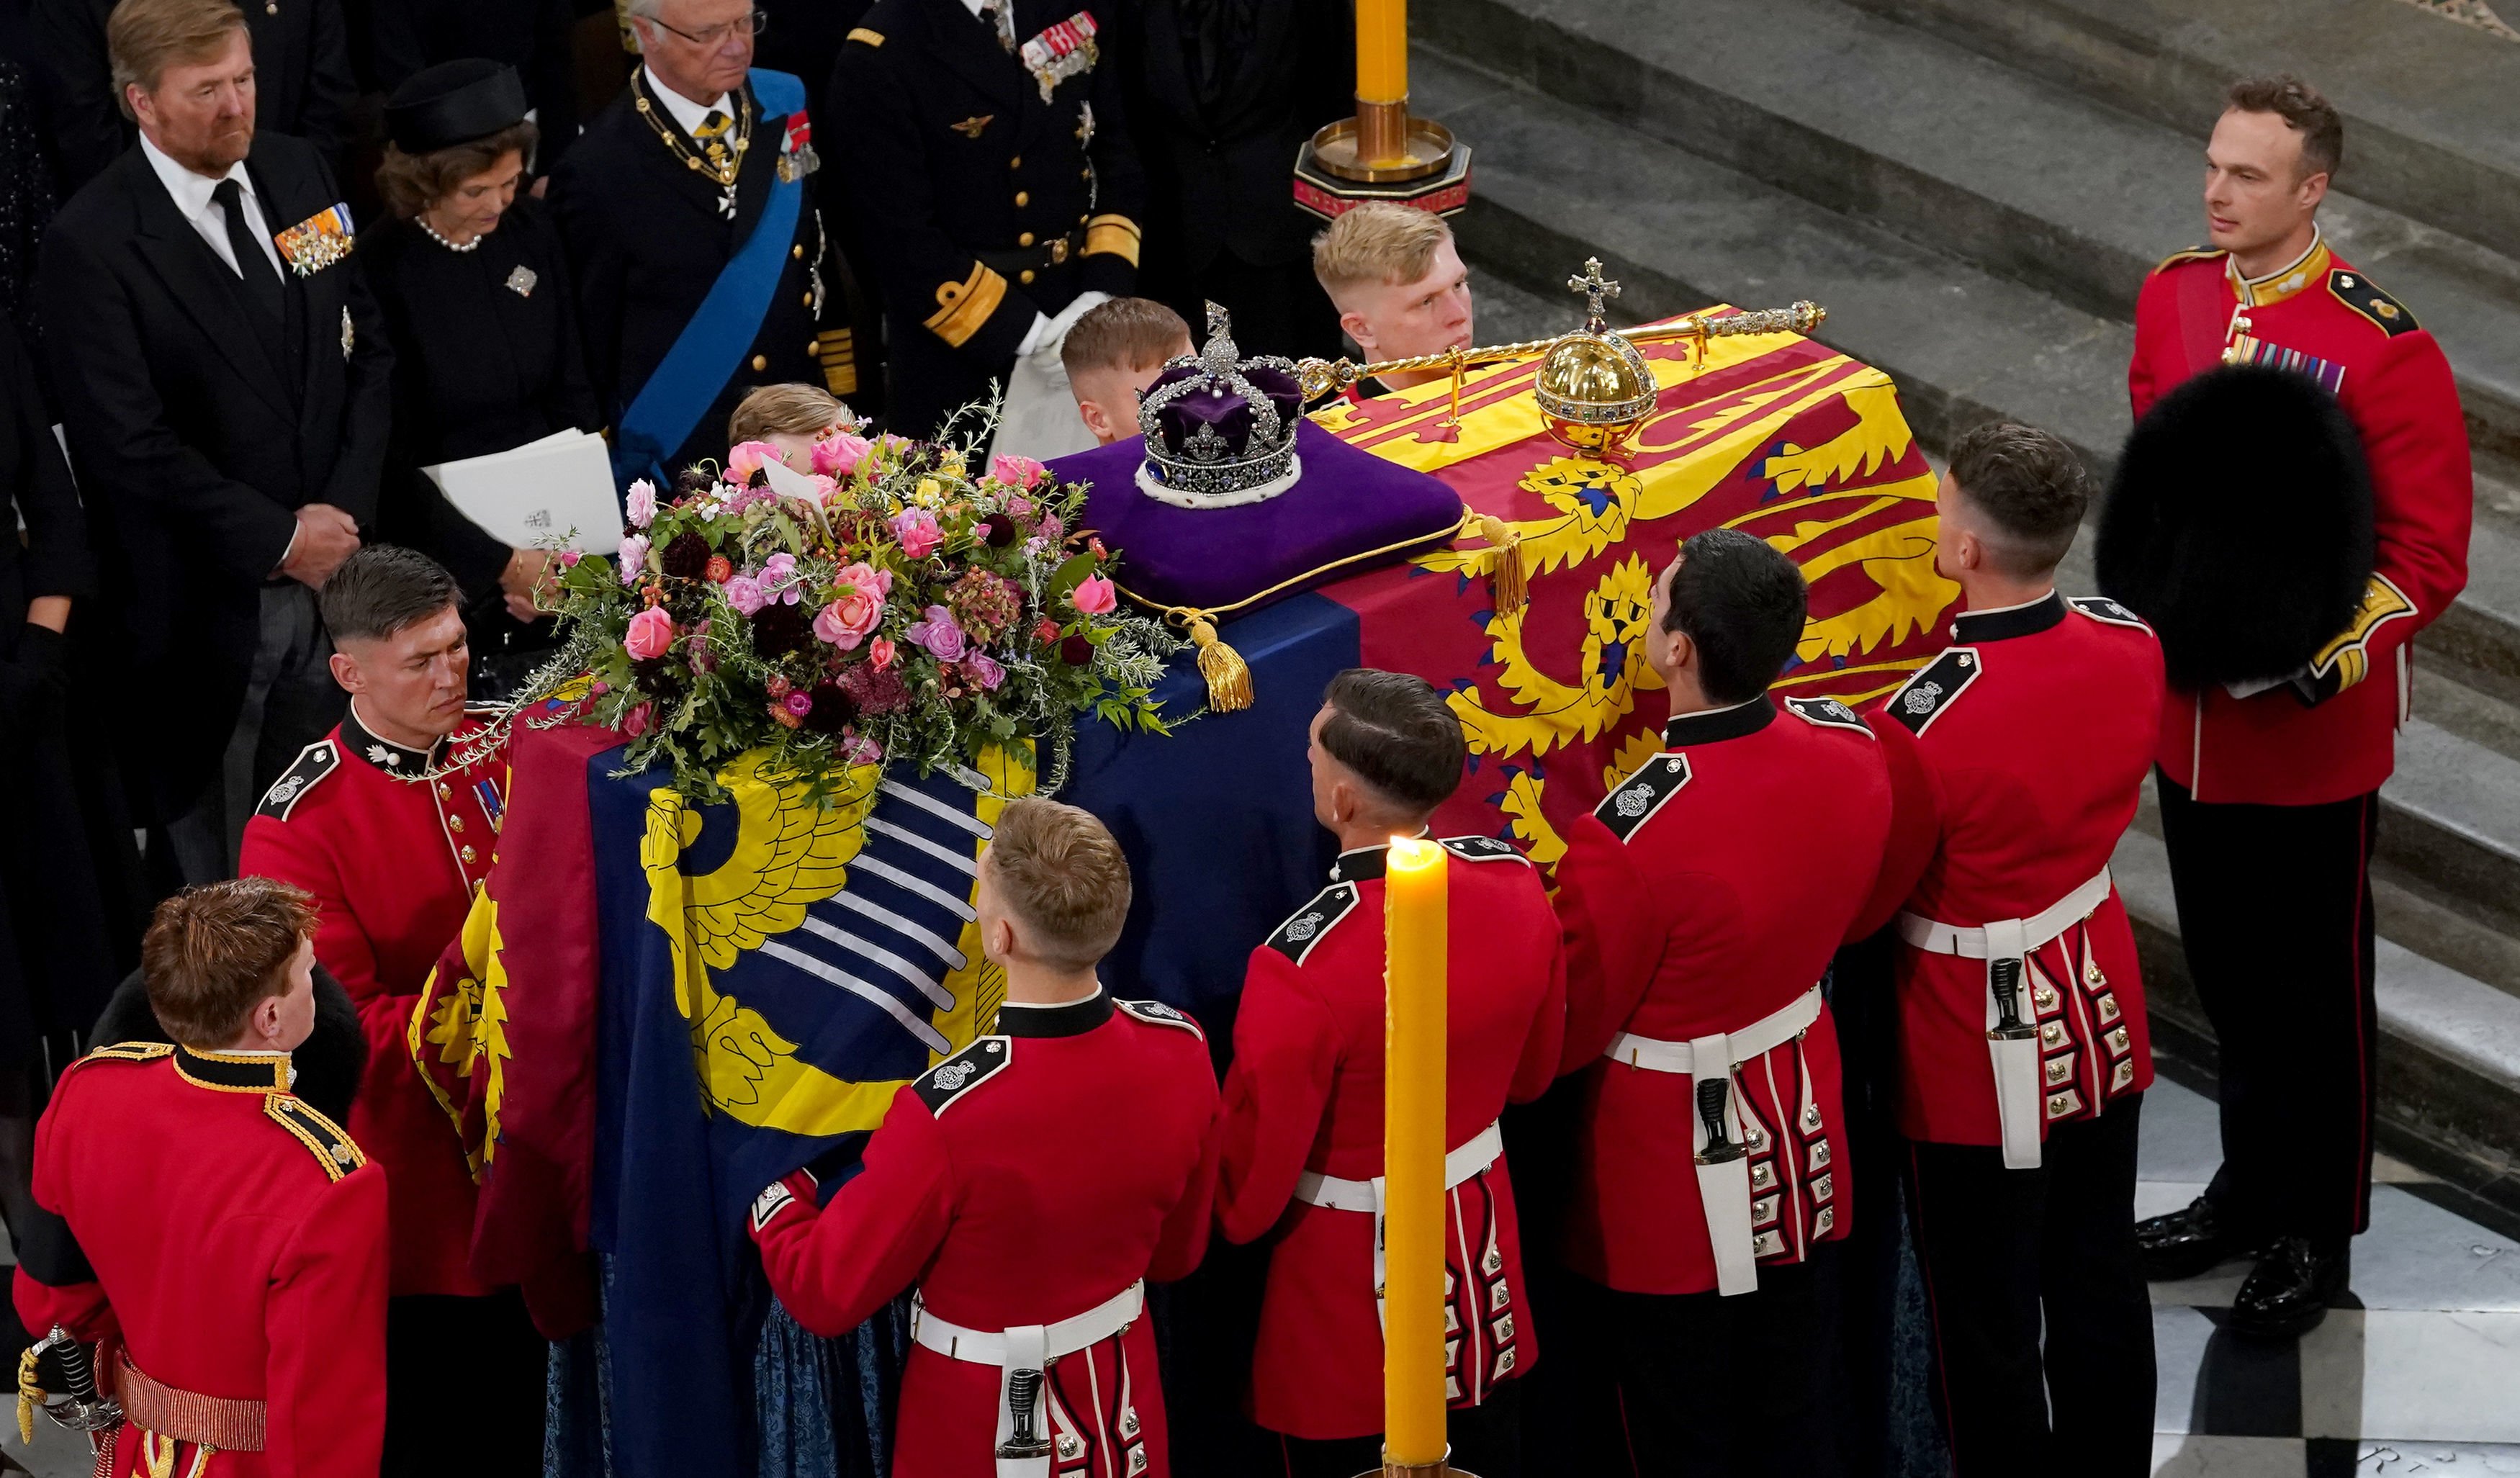 The bearer party with the coffin of Queen Elizabeth II as it is taken from Westminster Abbey on September 19, 2022, in London, England. | Source: Getty Images